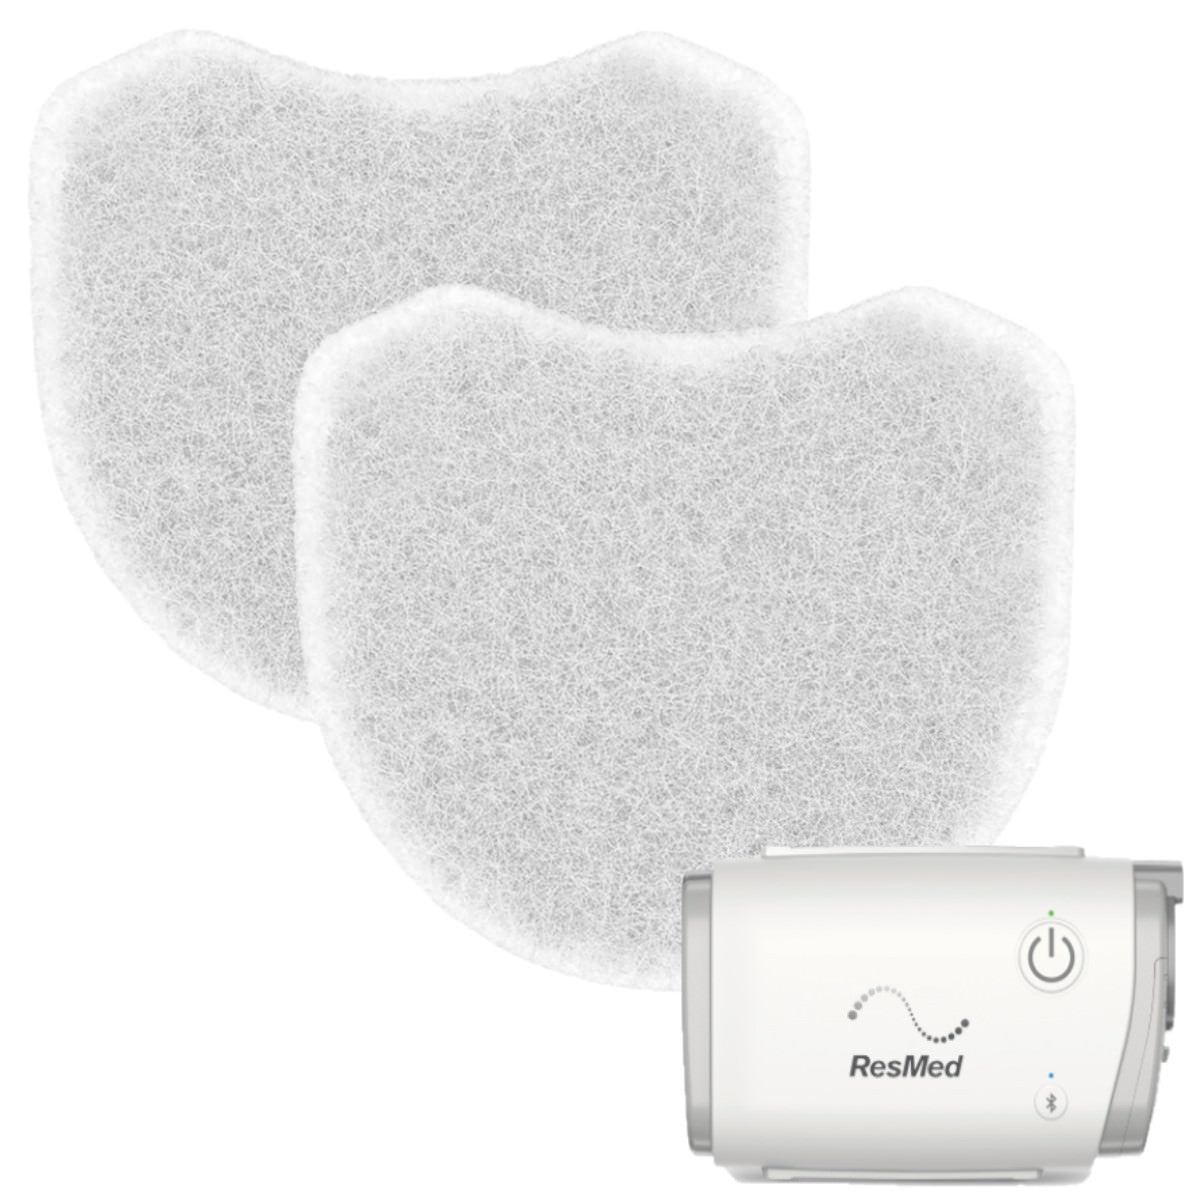 Two filters with an Airmini CPAP